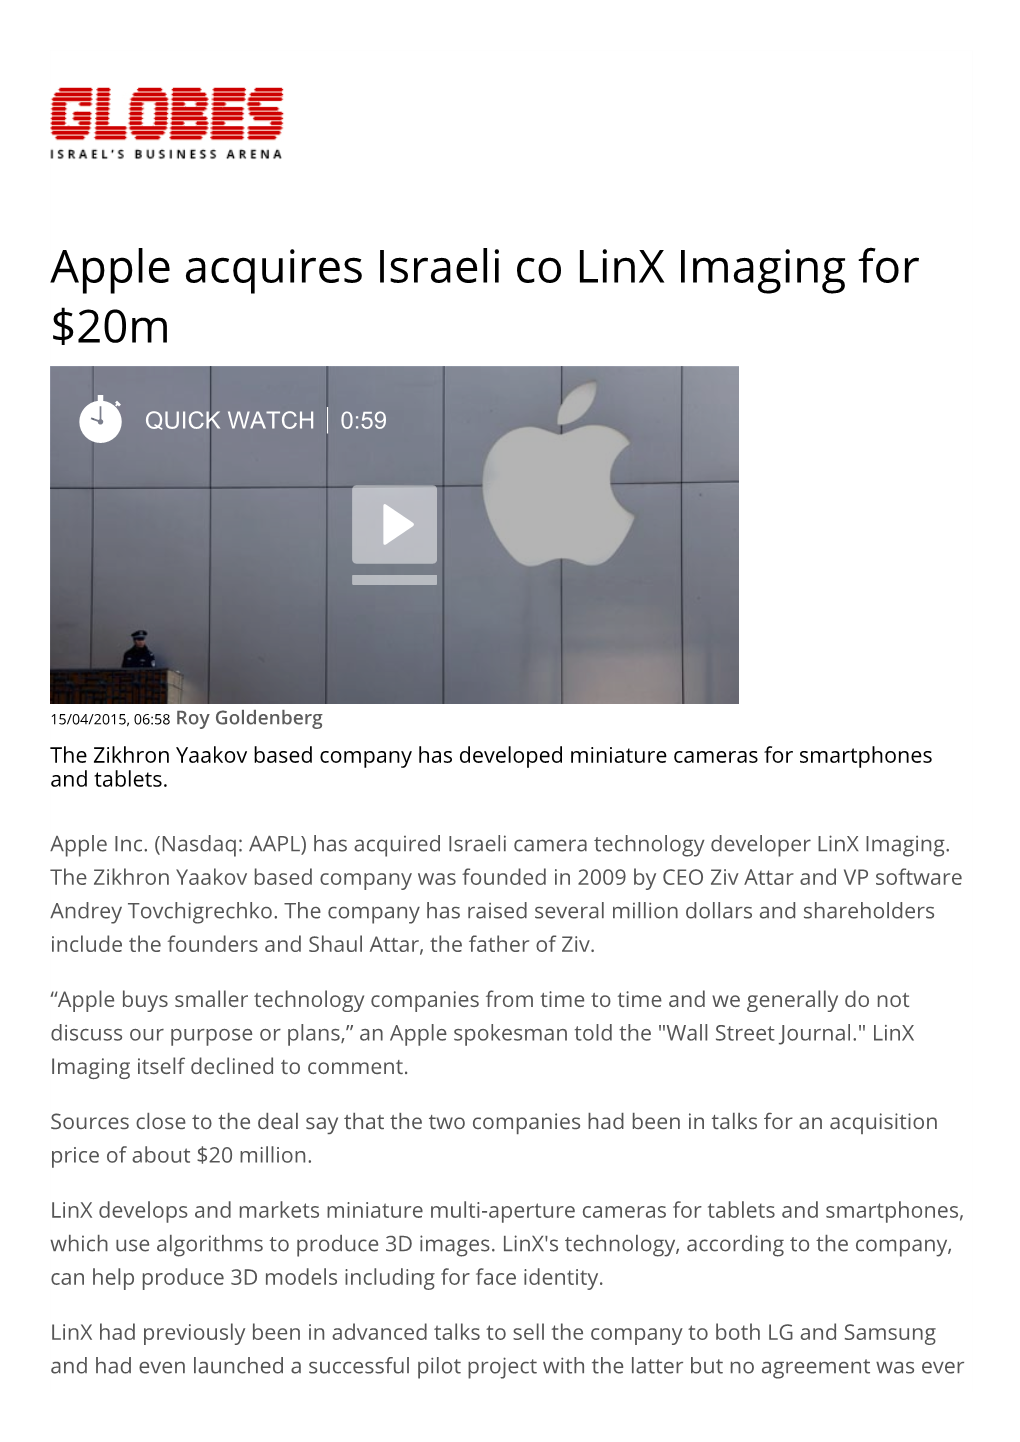 Apple Acquires Israeli Co Linx Imaging for $20M